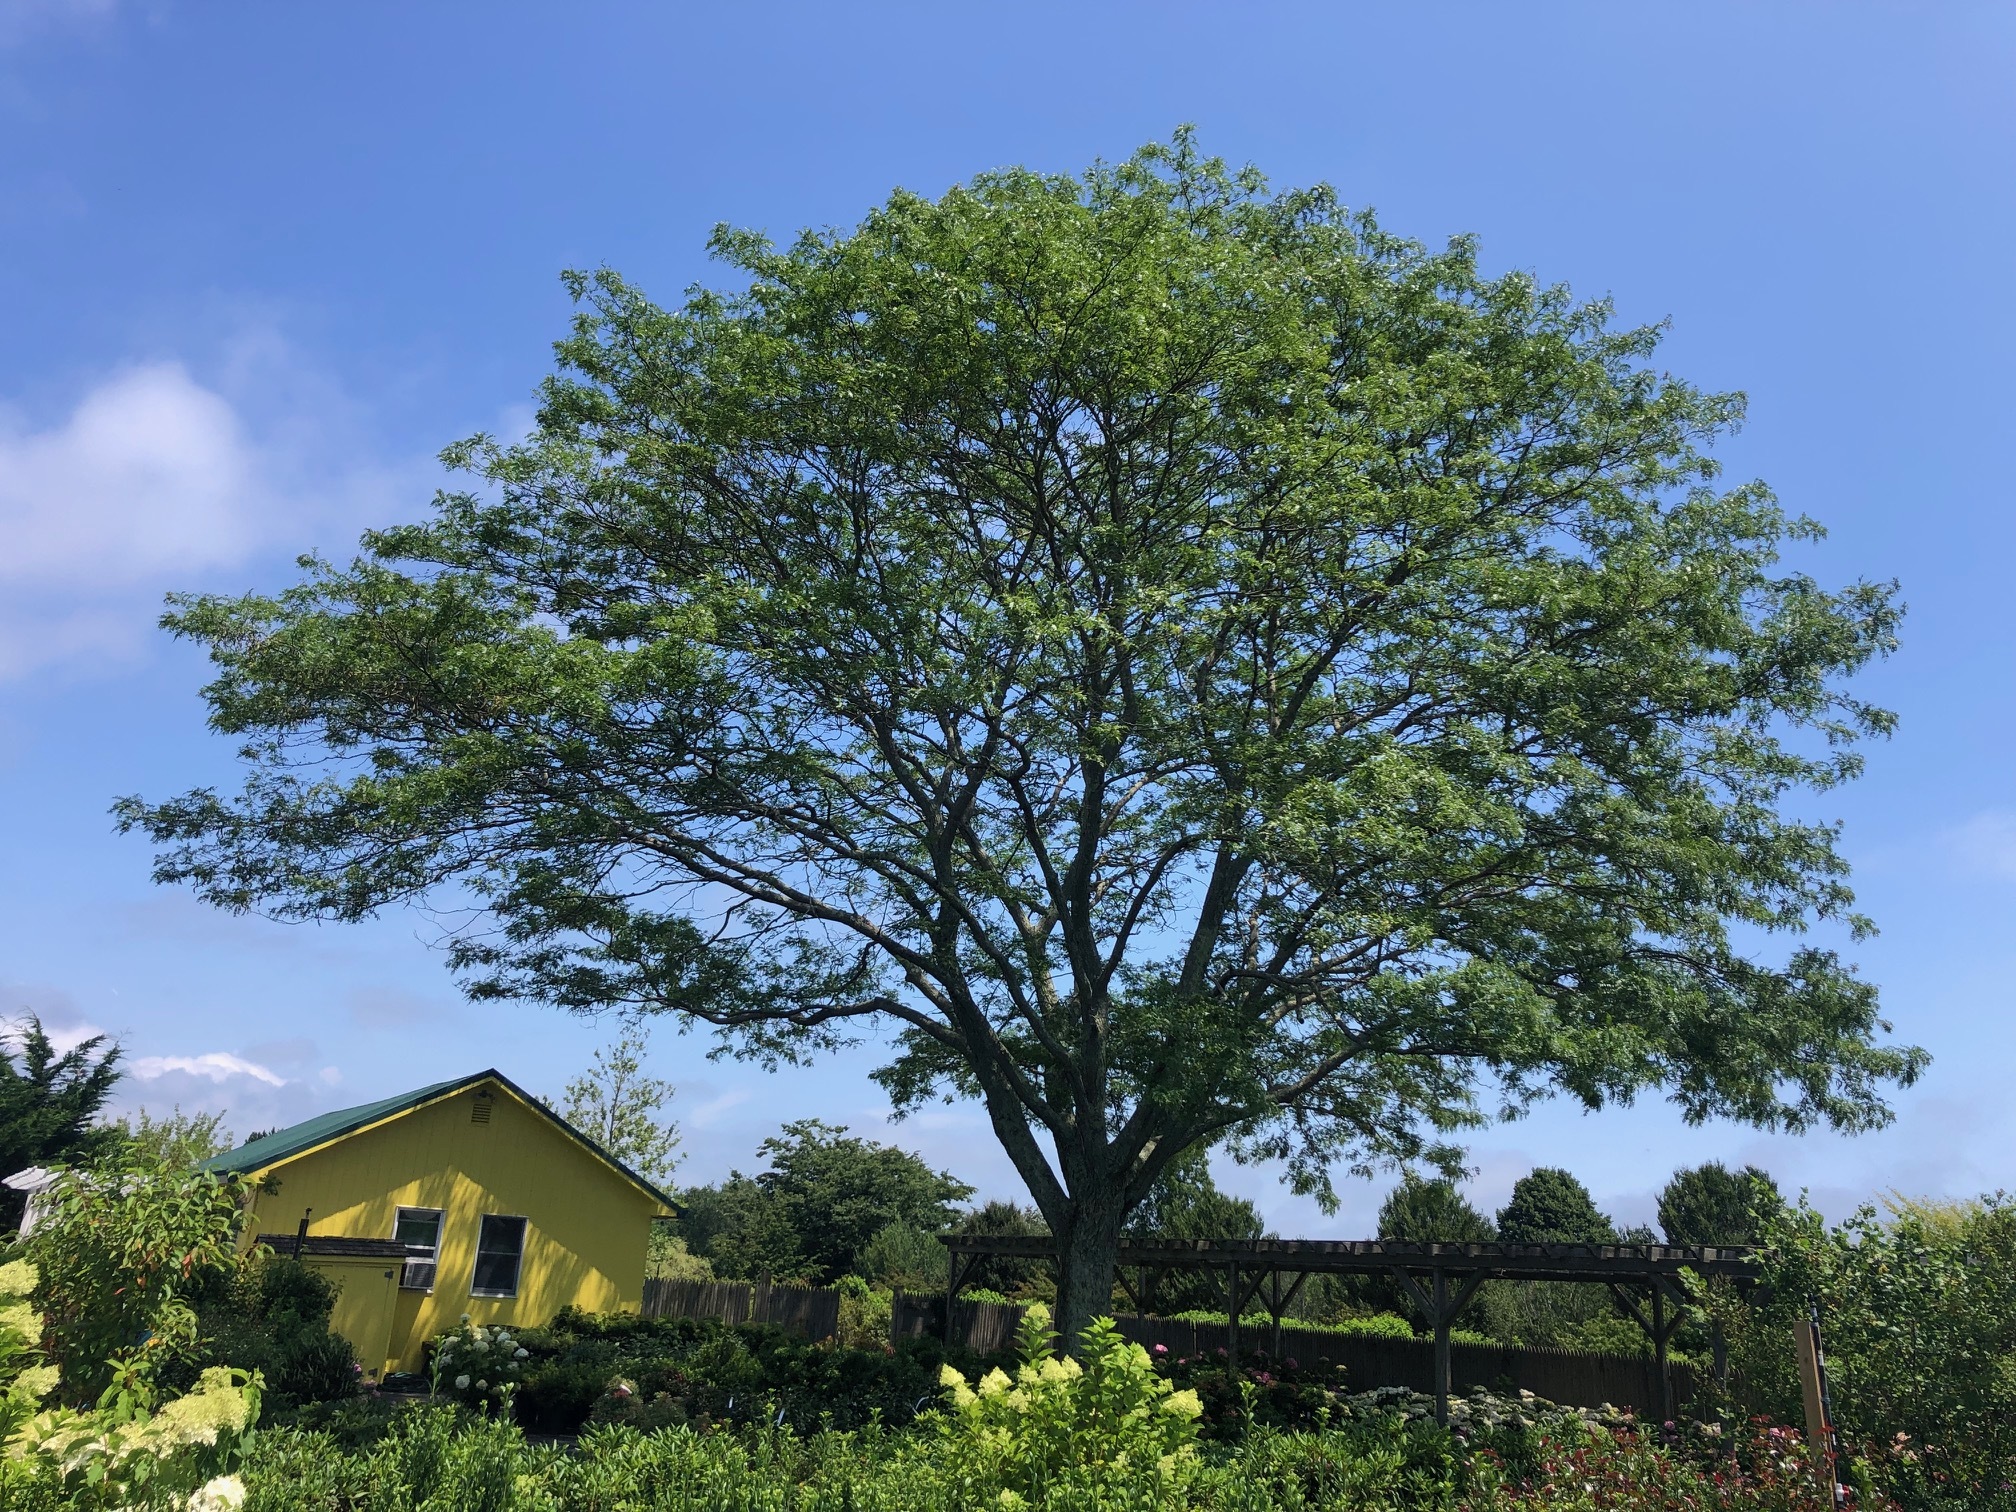 A honeylocust tree, like this one that shades the Whitmore Tree Farm, can reduce a building’s energy cost by up to 25 percent.